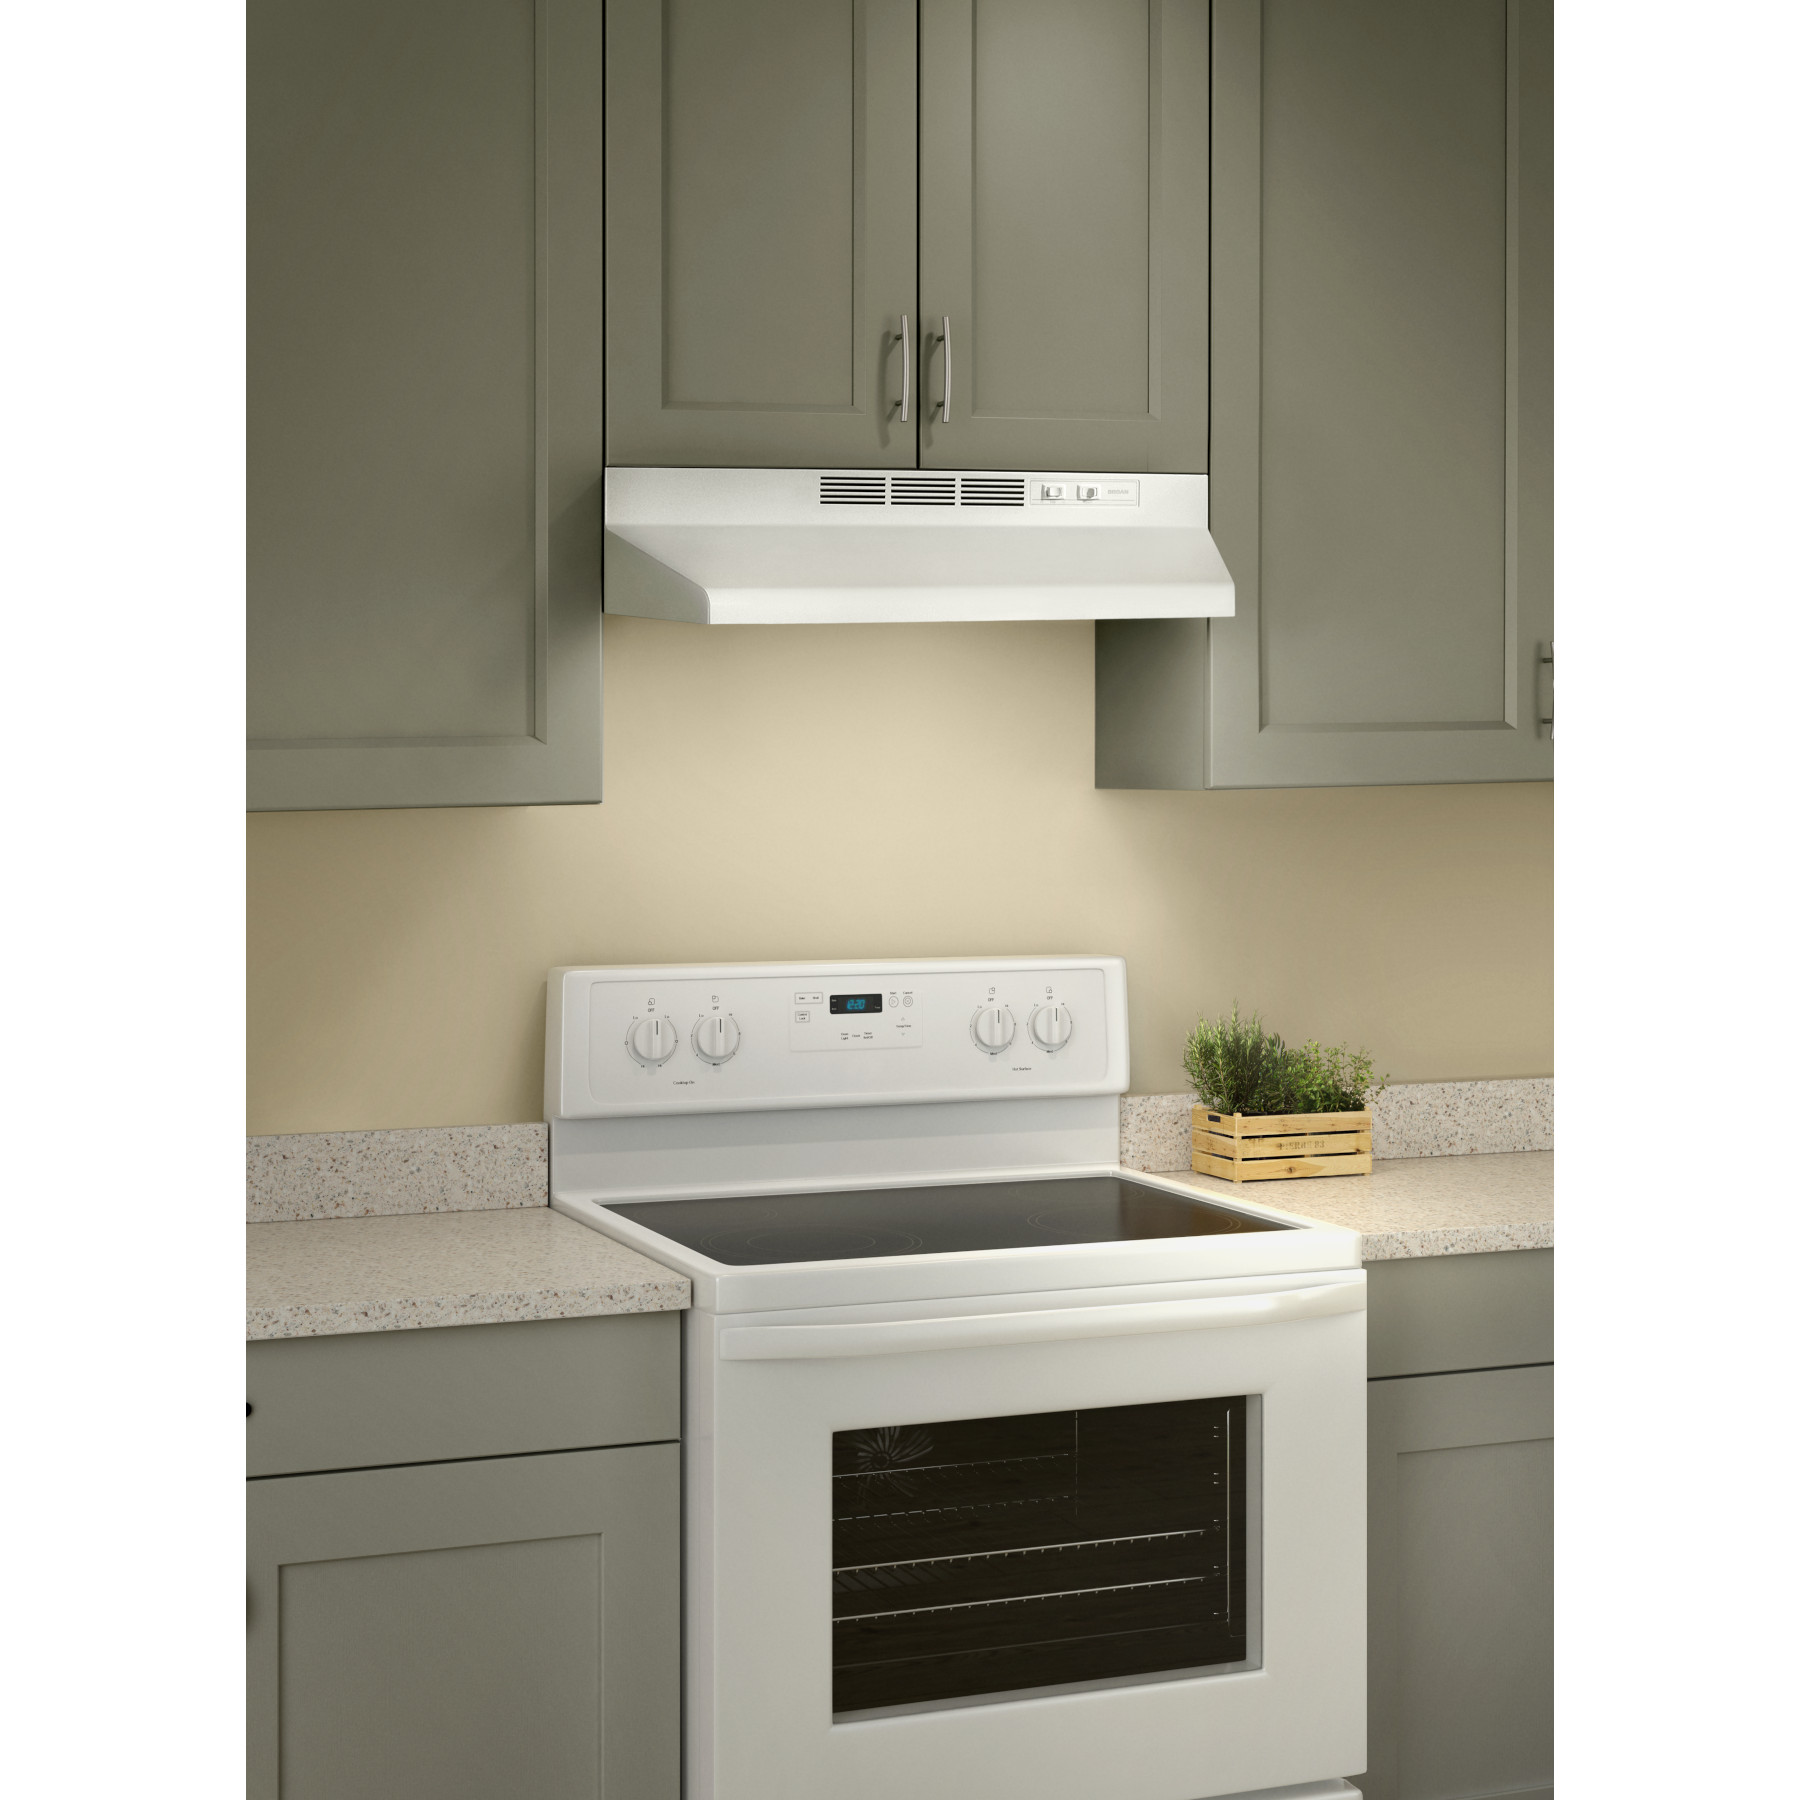 Broan-NuTone 413001 Non-Ducted Ductless Range Hood with Lights Exhaust Fan 